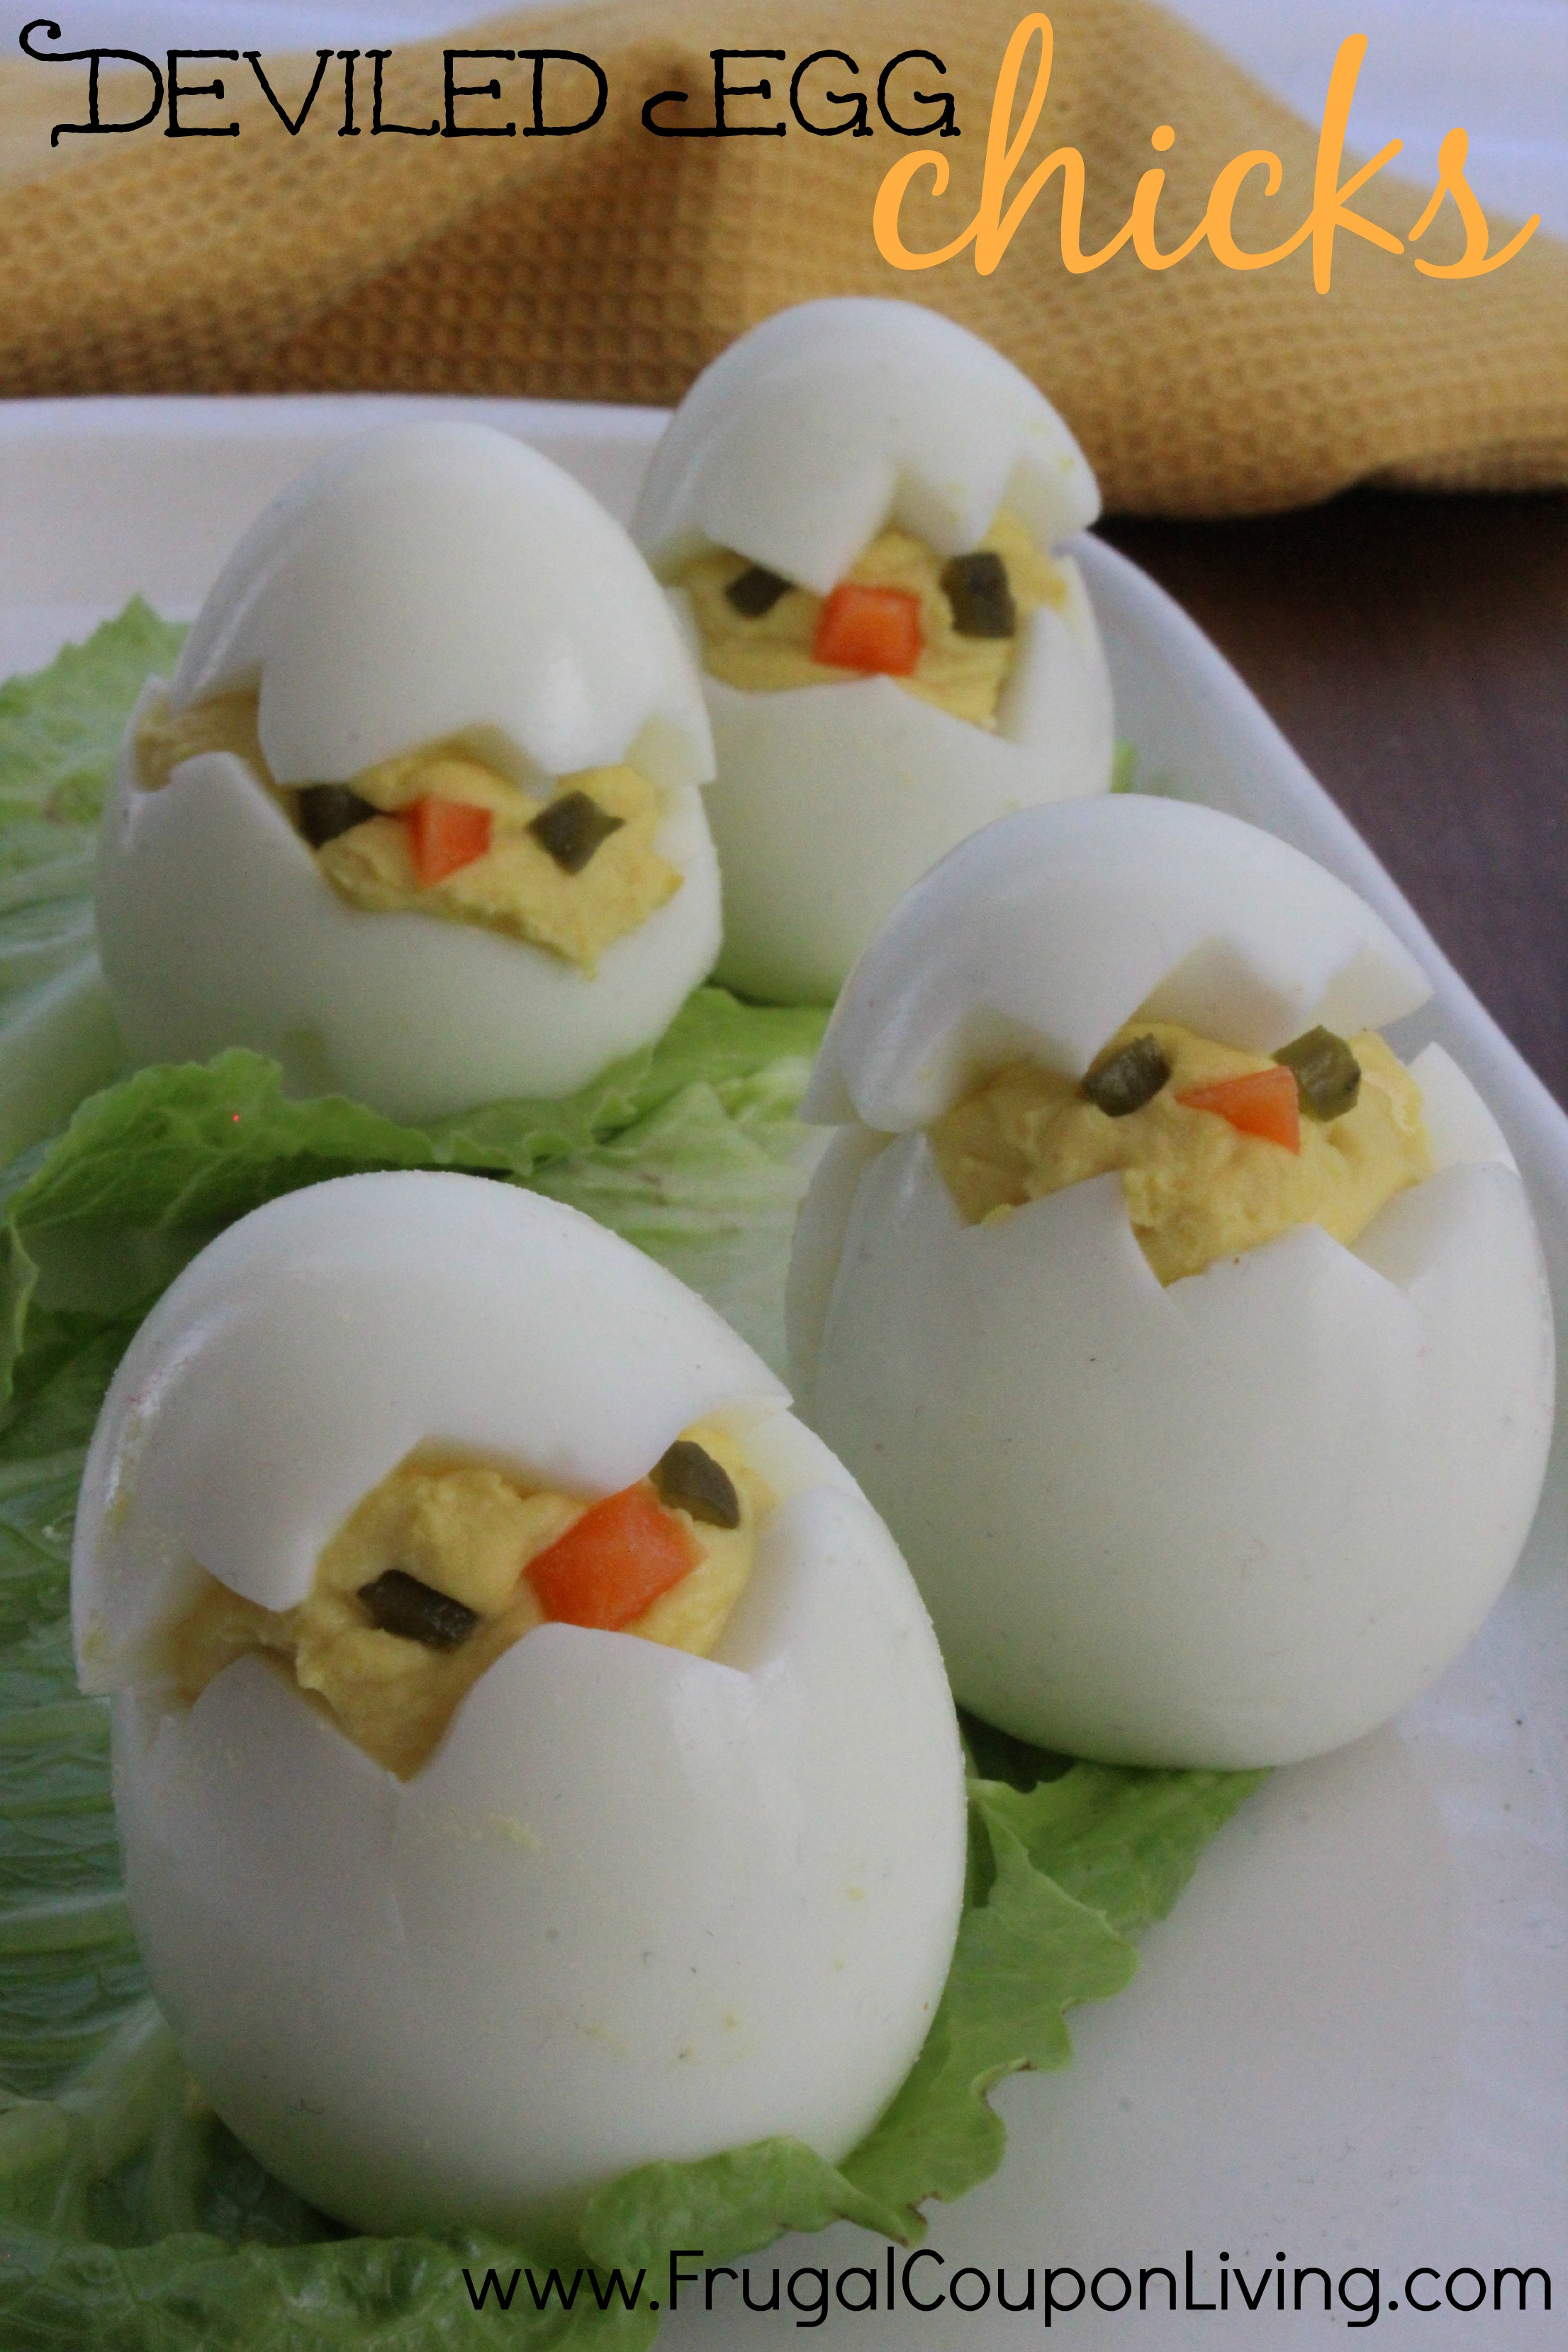 Easter Deviled Eggs Recipe
 Easter Deviled Egg Chicks Recipe Twist on the Norm